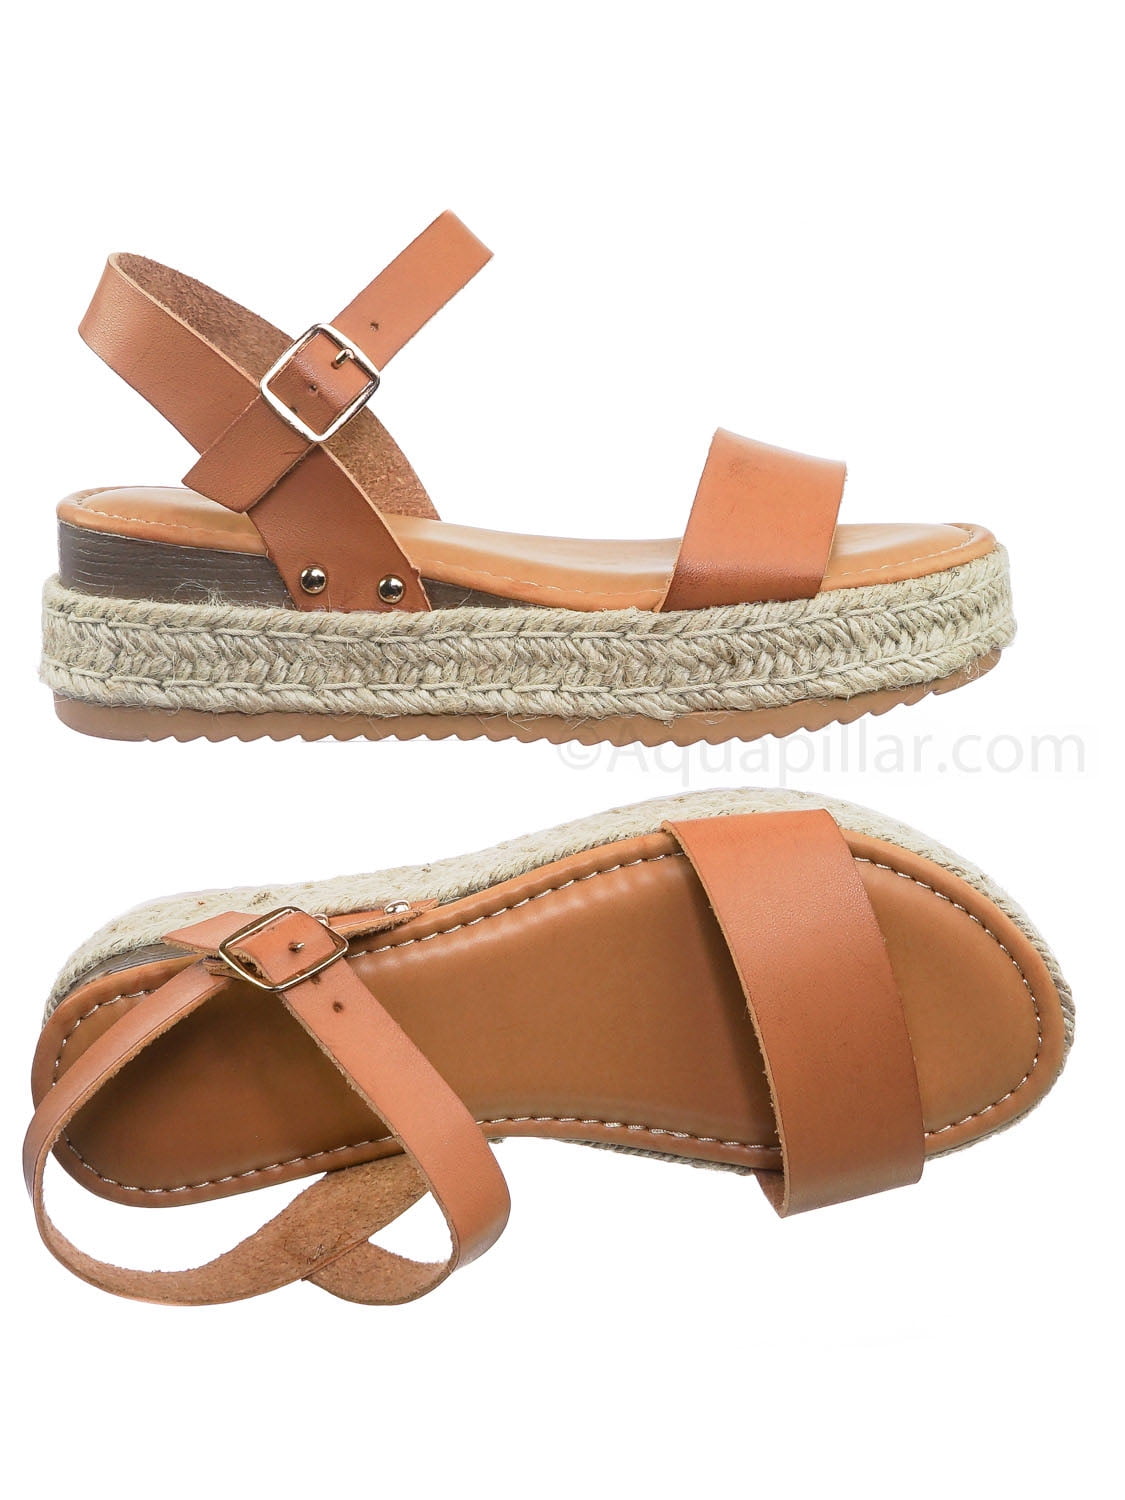 sandals with small platform